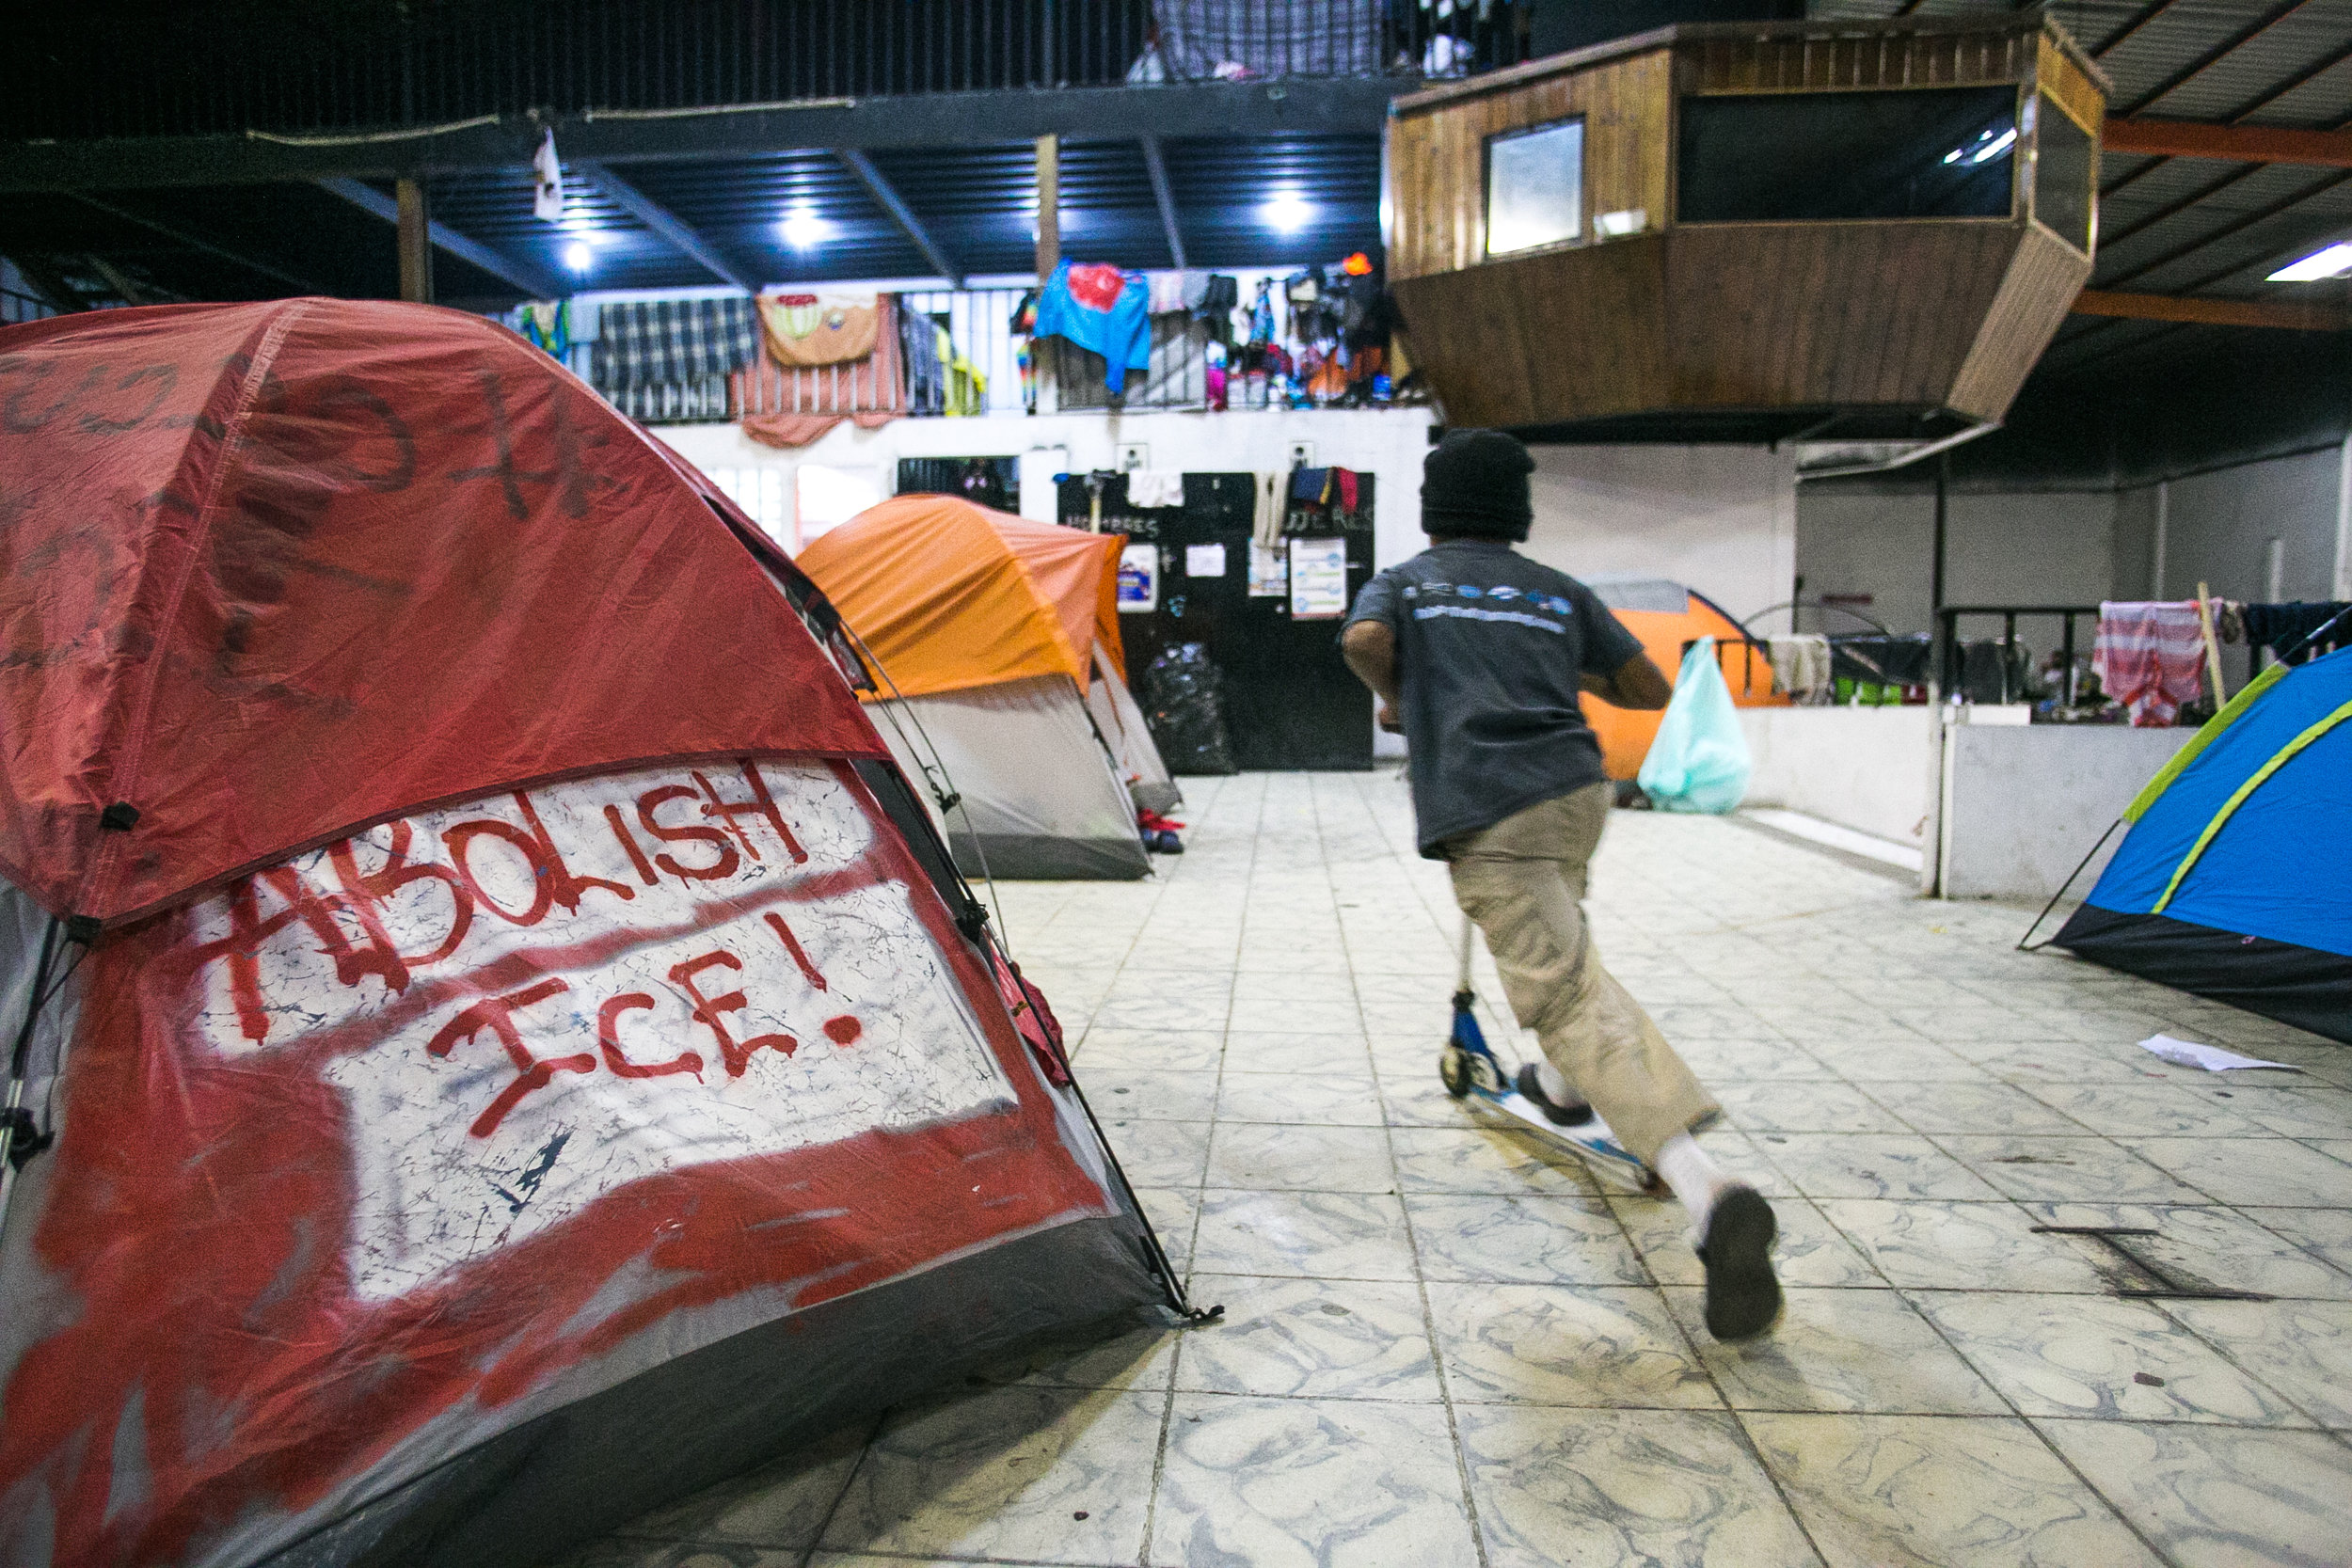  A boy scooters by a tent spray painted with the text “Abolish ICE” in the Barretal migrant camp located 15 miles outside Tijuana, Mexico. This section of the camp houses woman, children, and elderly. Many of the families have been waiting for their 